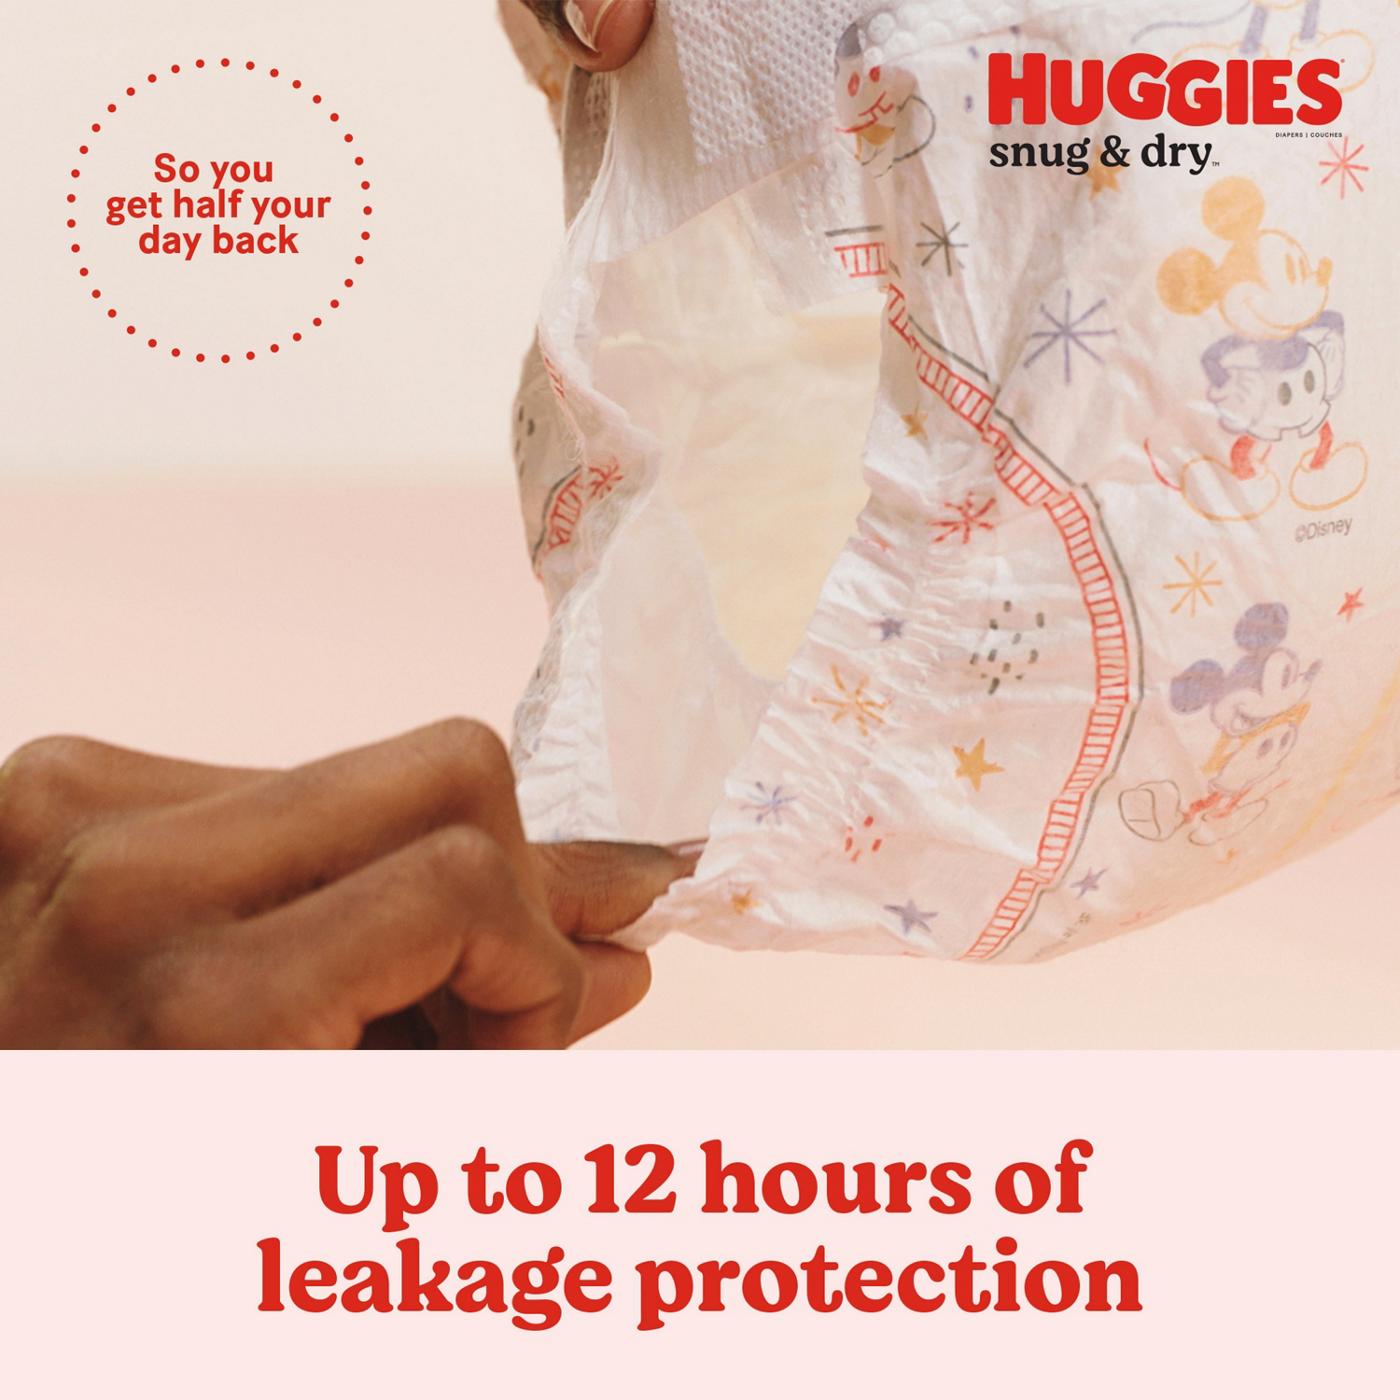 Huggies Little Snugglers Baby Diapers - Size 6 - Shop Diapers at H-E-B